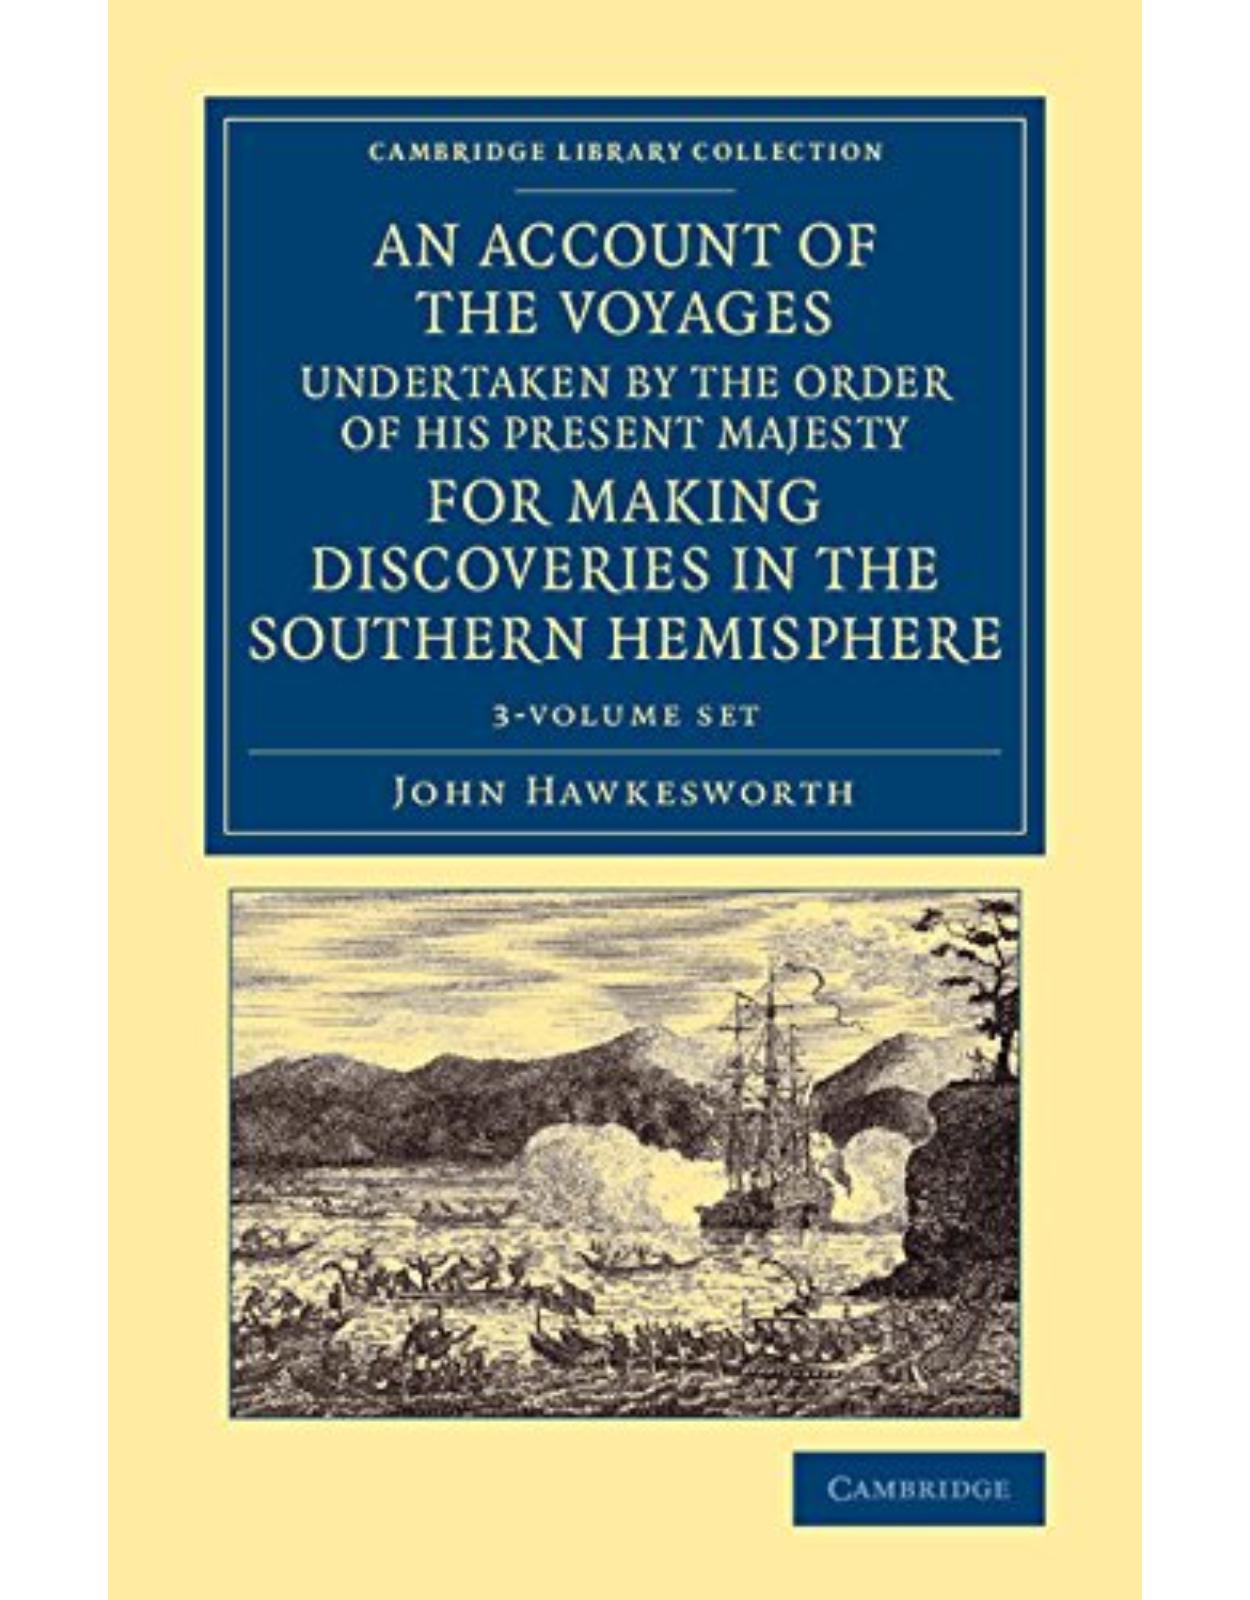 An Account of the Voyages Undertaken by the Order of His Present Majesty for Making Discoveries in the Southern Hemisphere 3 Volume Set (Cambridge Library Collection - Maritime Exploration)